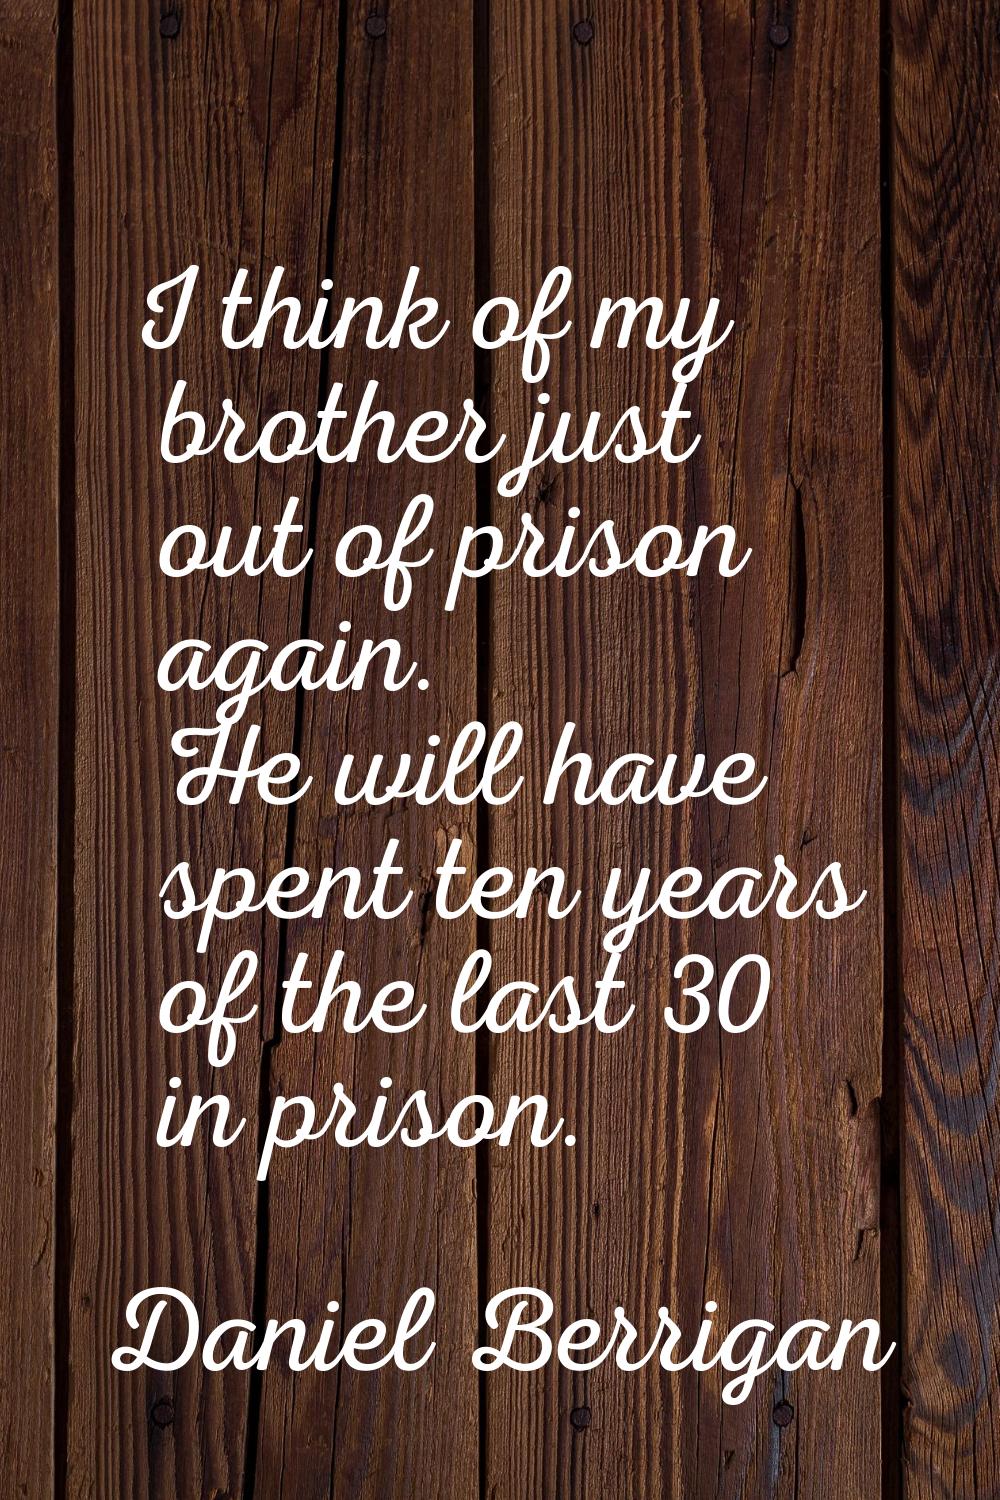 I think of my brother just out of prison again. He will have spent ten years of the last 30 in pris